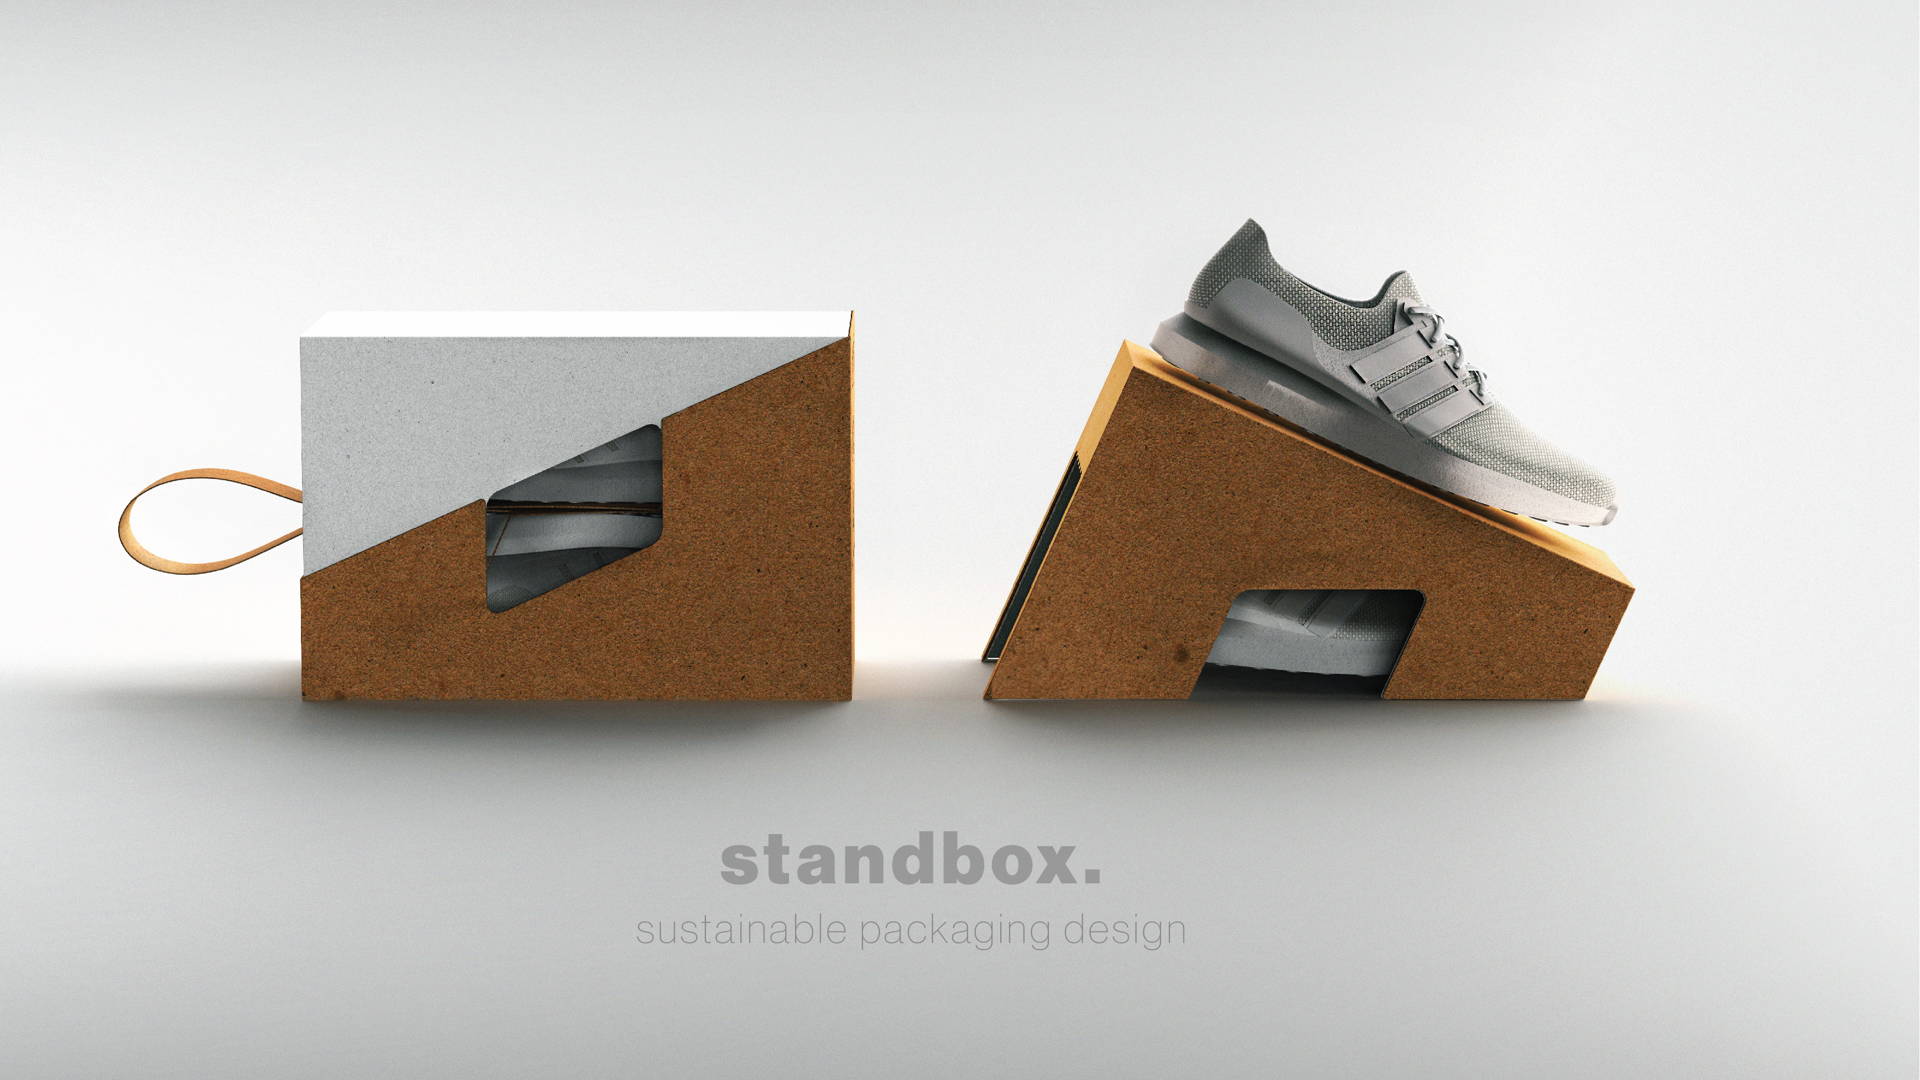 Standbox Is A Conceptual Sustainable Shoe Box That The Market Needs |  Dieline - Design, Branding & Packaging Inspiration